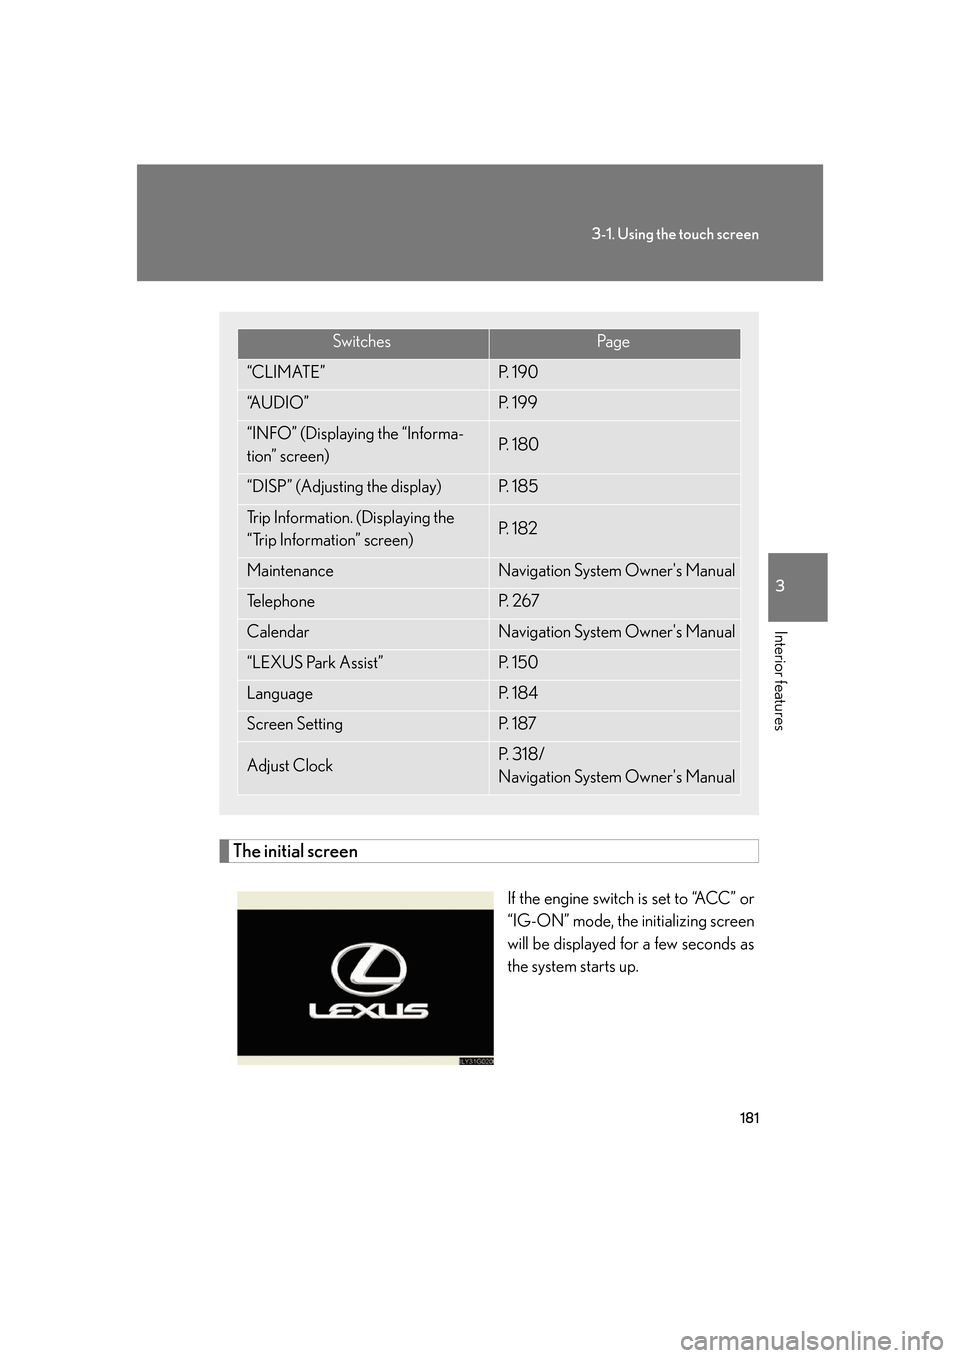 Lexus GS350 2007  Anti-theft system / LEXUS 2007 GS430/350 OWNERS MANUAL (OM30A04U) 181
3-1. Using the touch screen
3
Interior features
The initial screen
If the engine switch is set to “ACC” or 
“IG-ON” mode, the initializing screen 
will be displayed for a few seconds as 
t